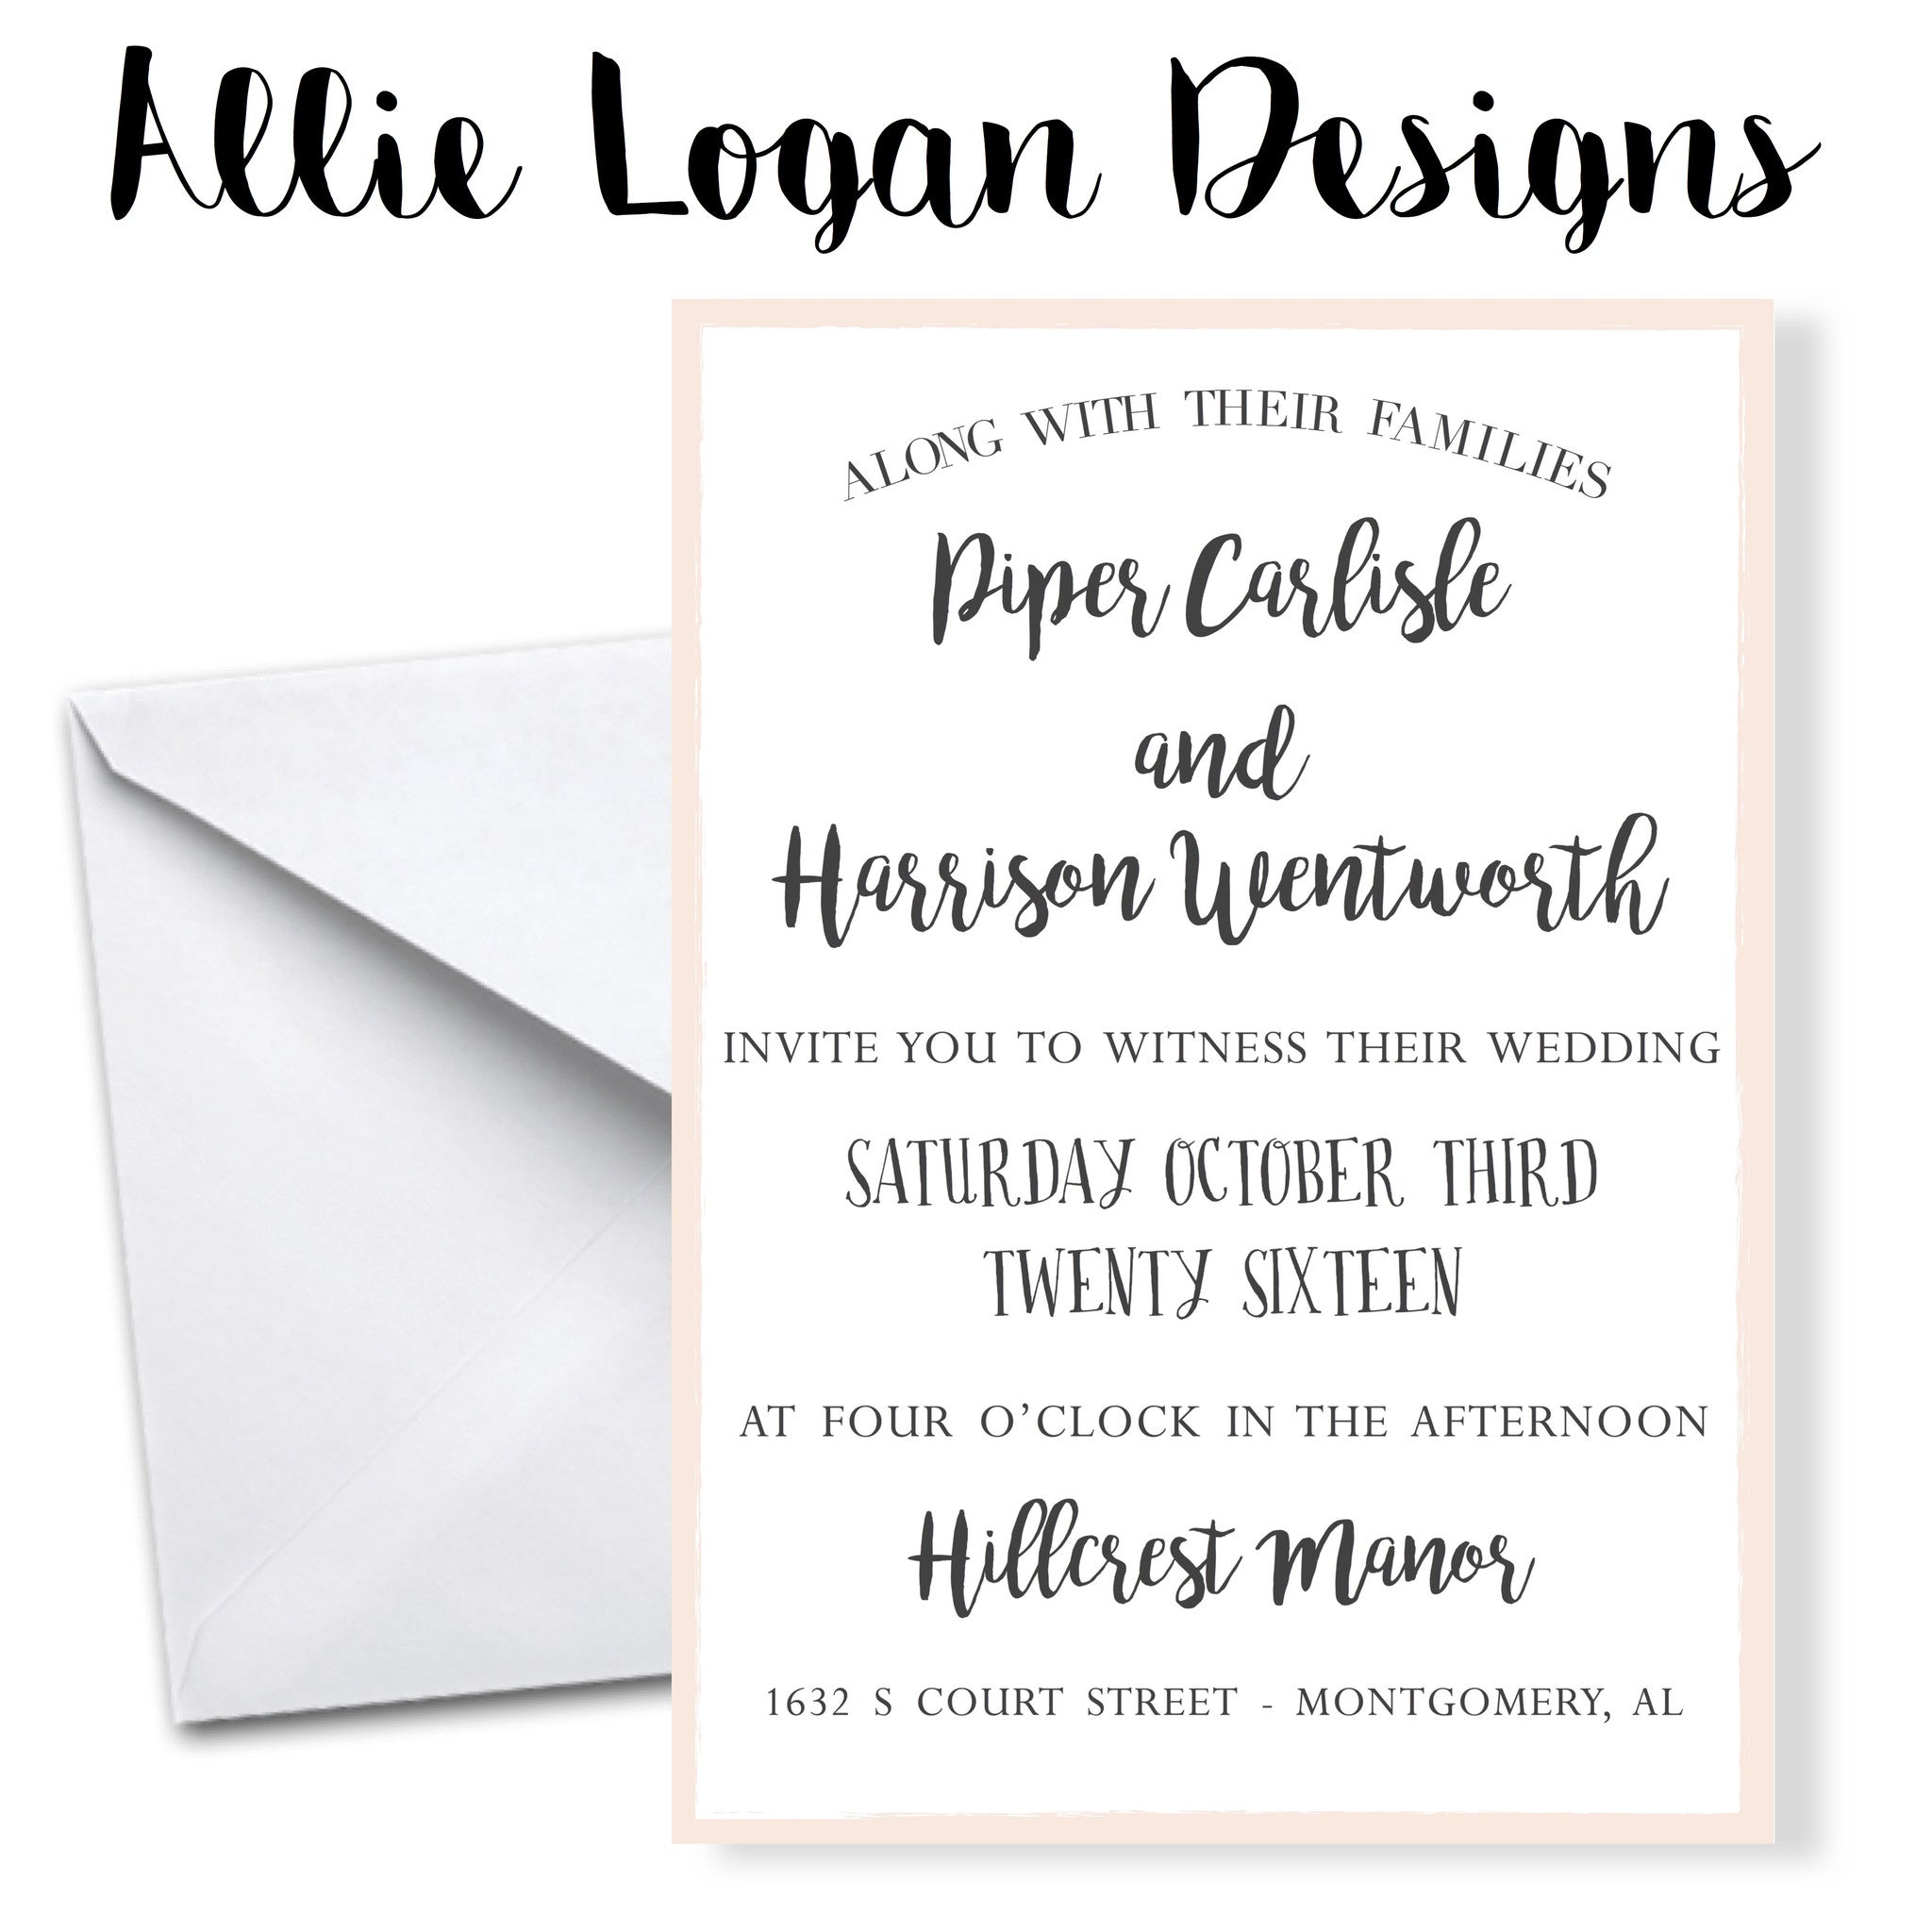 Calligraphy-Inspired Wedding Invitations - Choose Your Accent Color